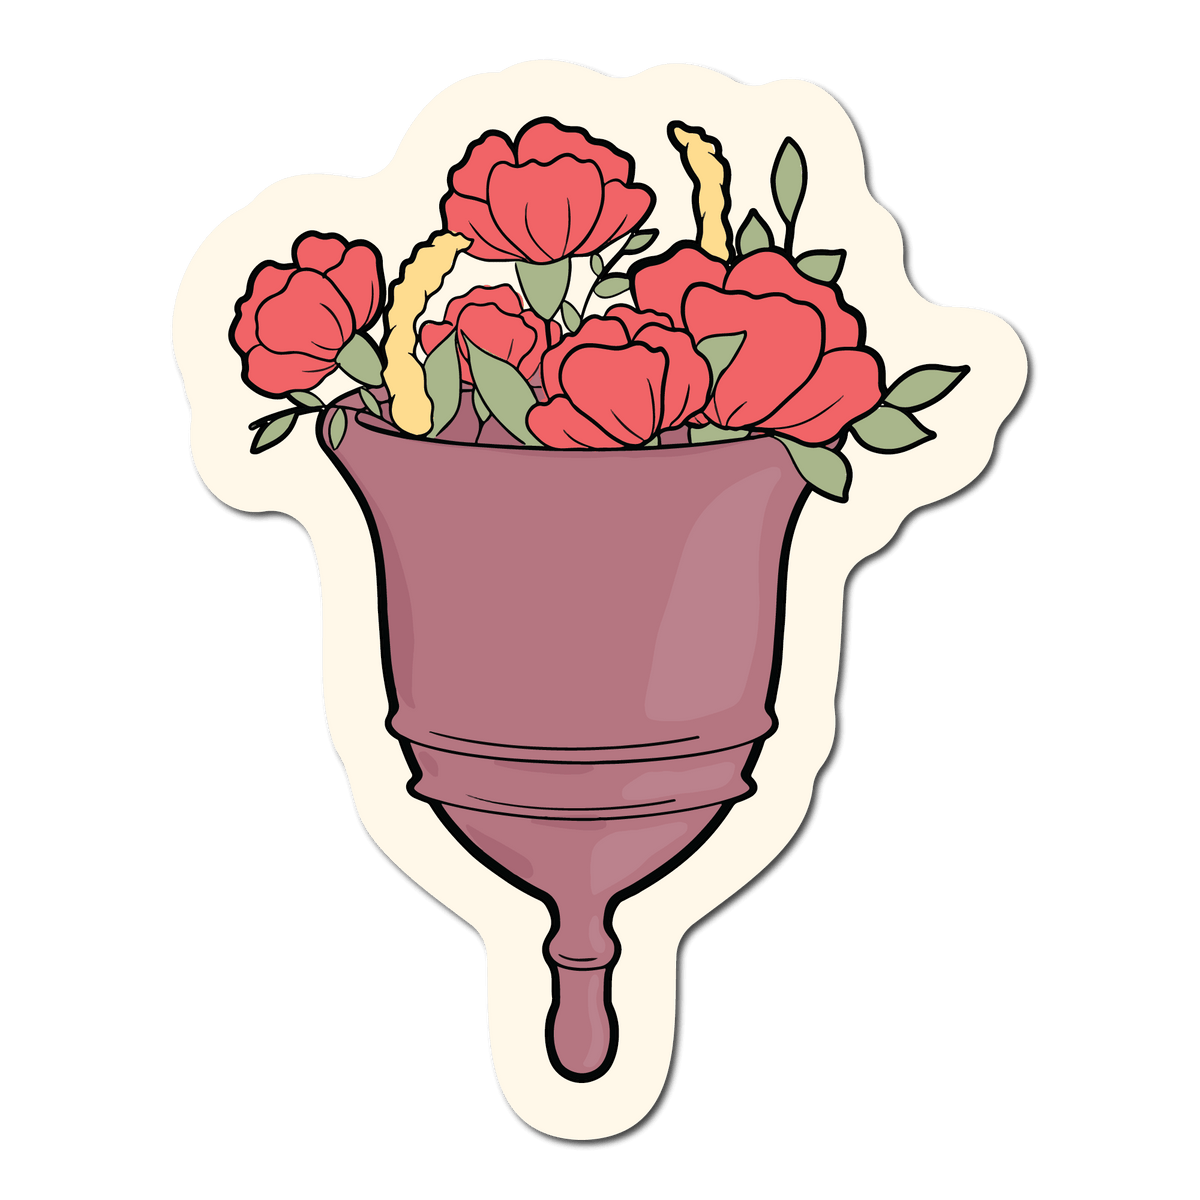 Small Sticker of a purple menstrual cup that has flowers in it